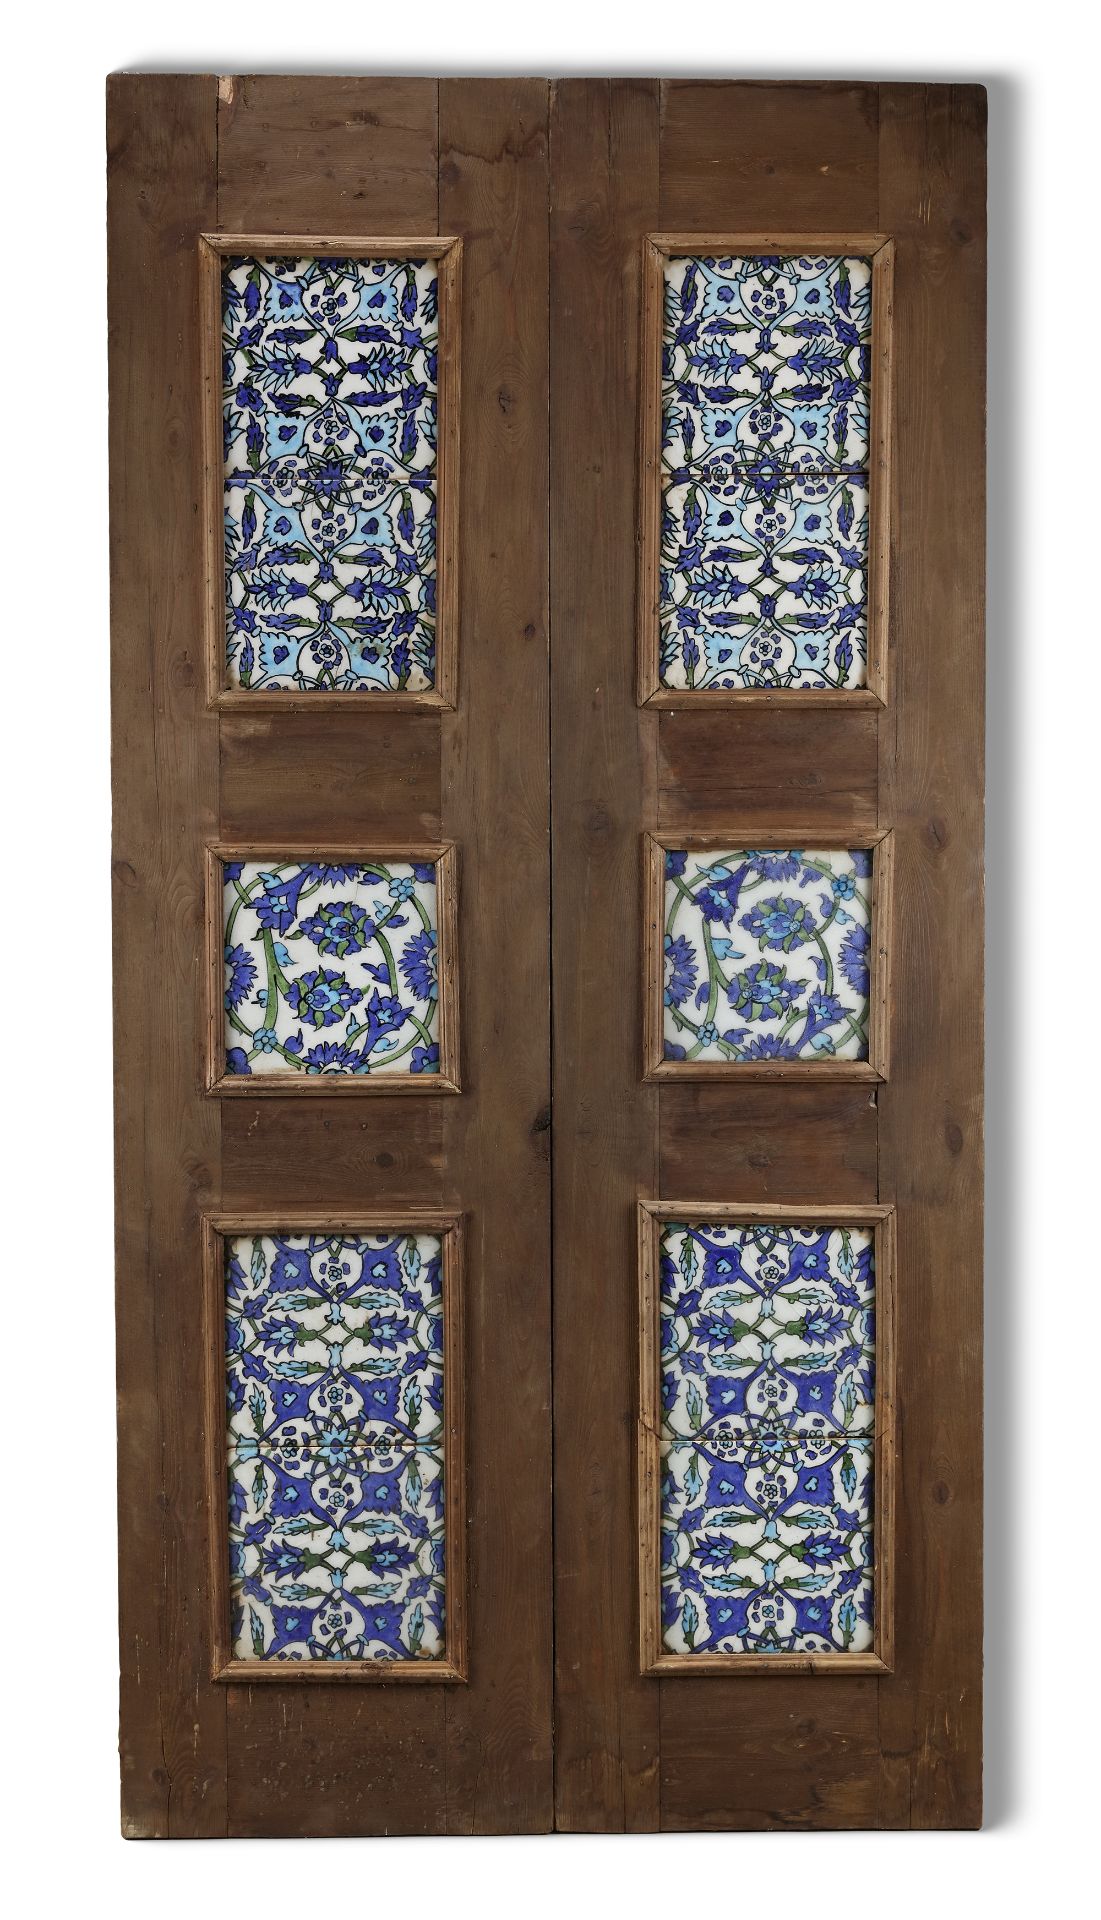 A WOODEN DOOR SET WITH 10 DAMASCUS STYLE POTTERY TILES, 20TH CENTURY